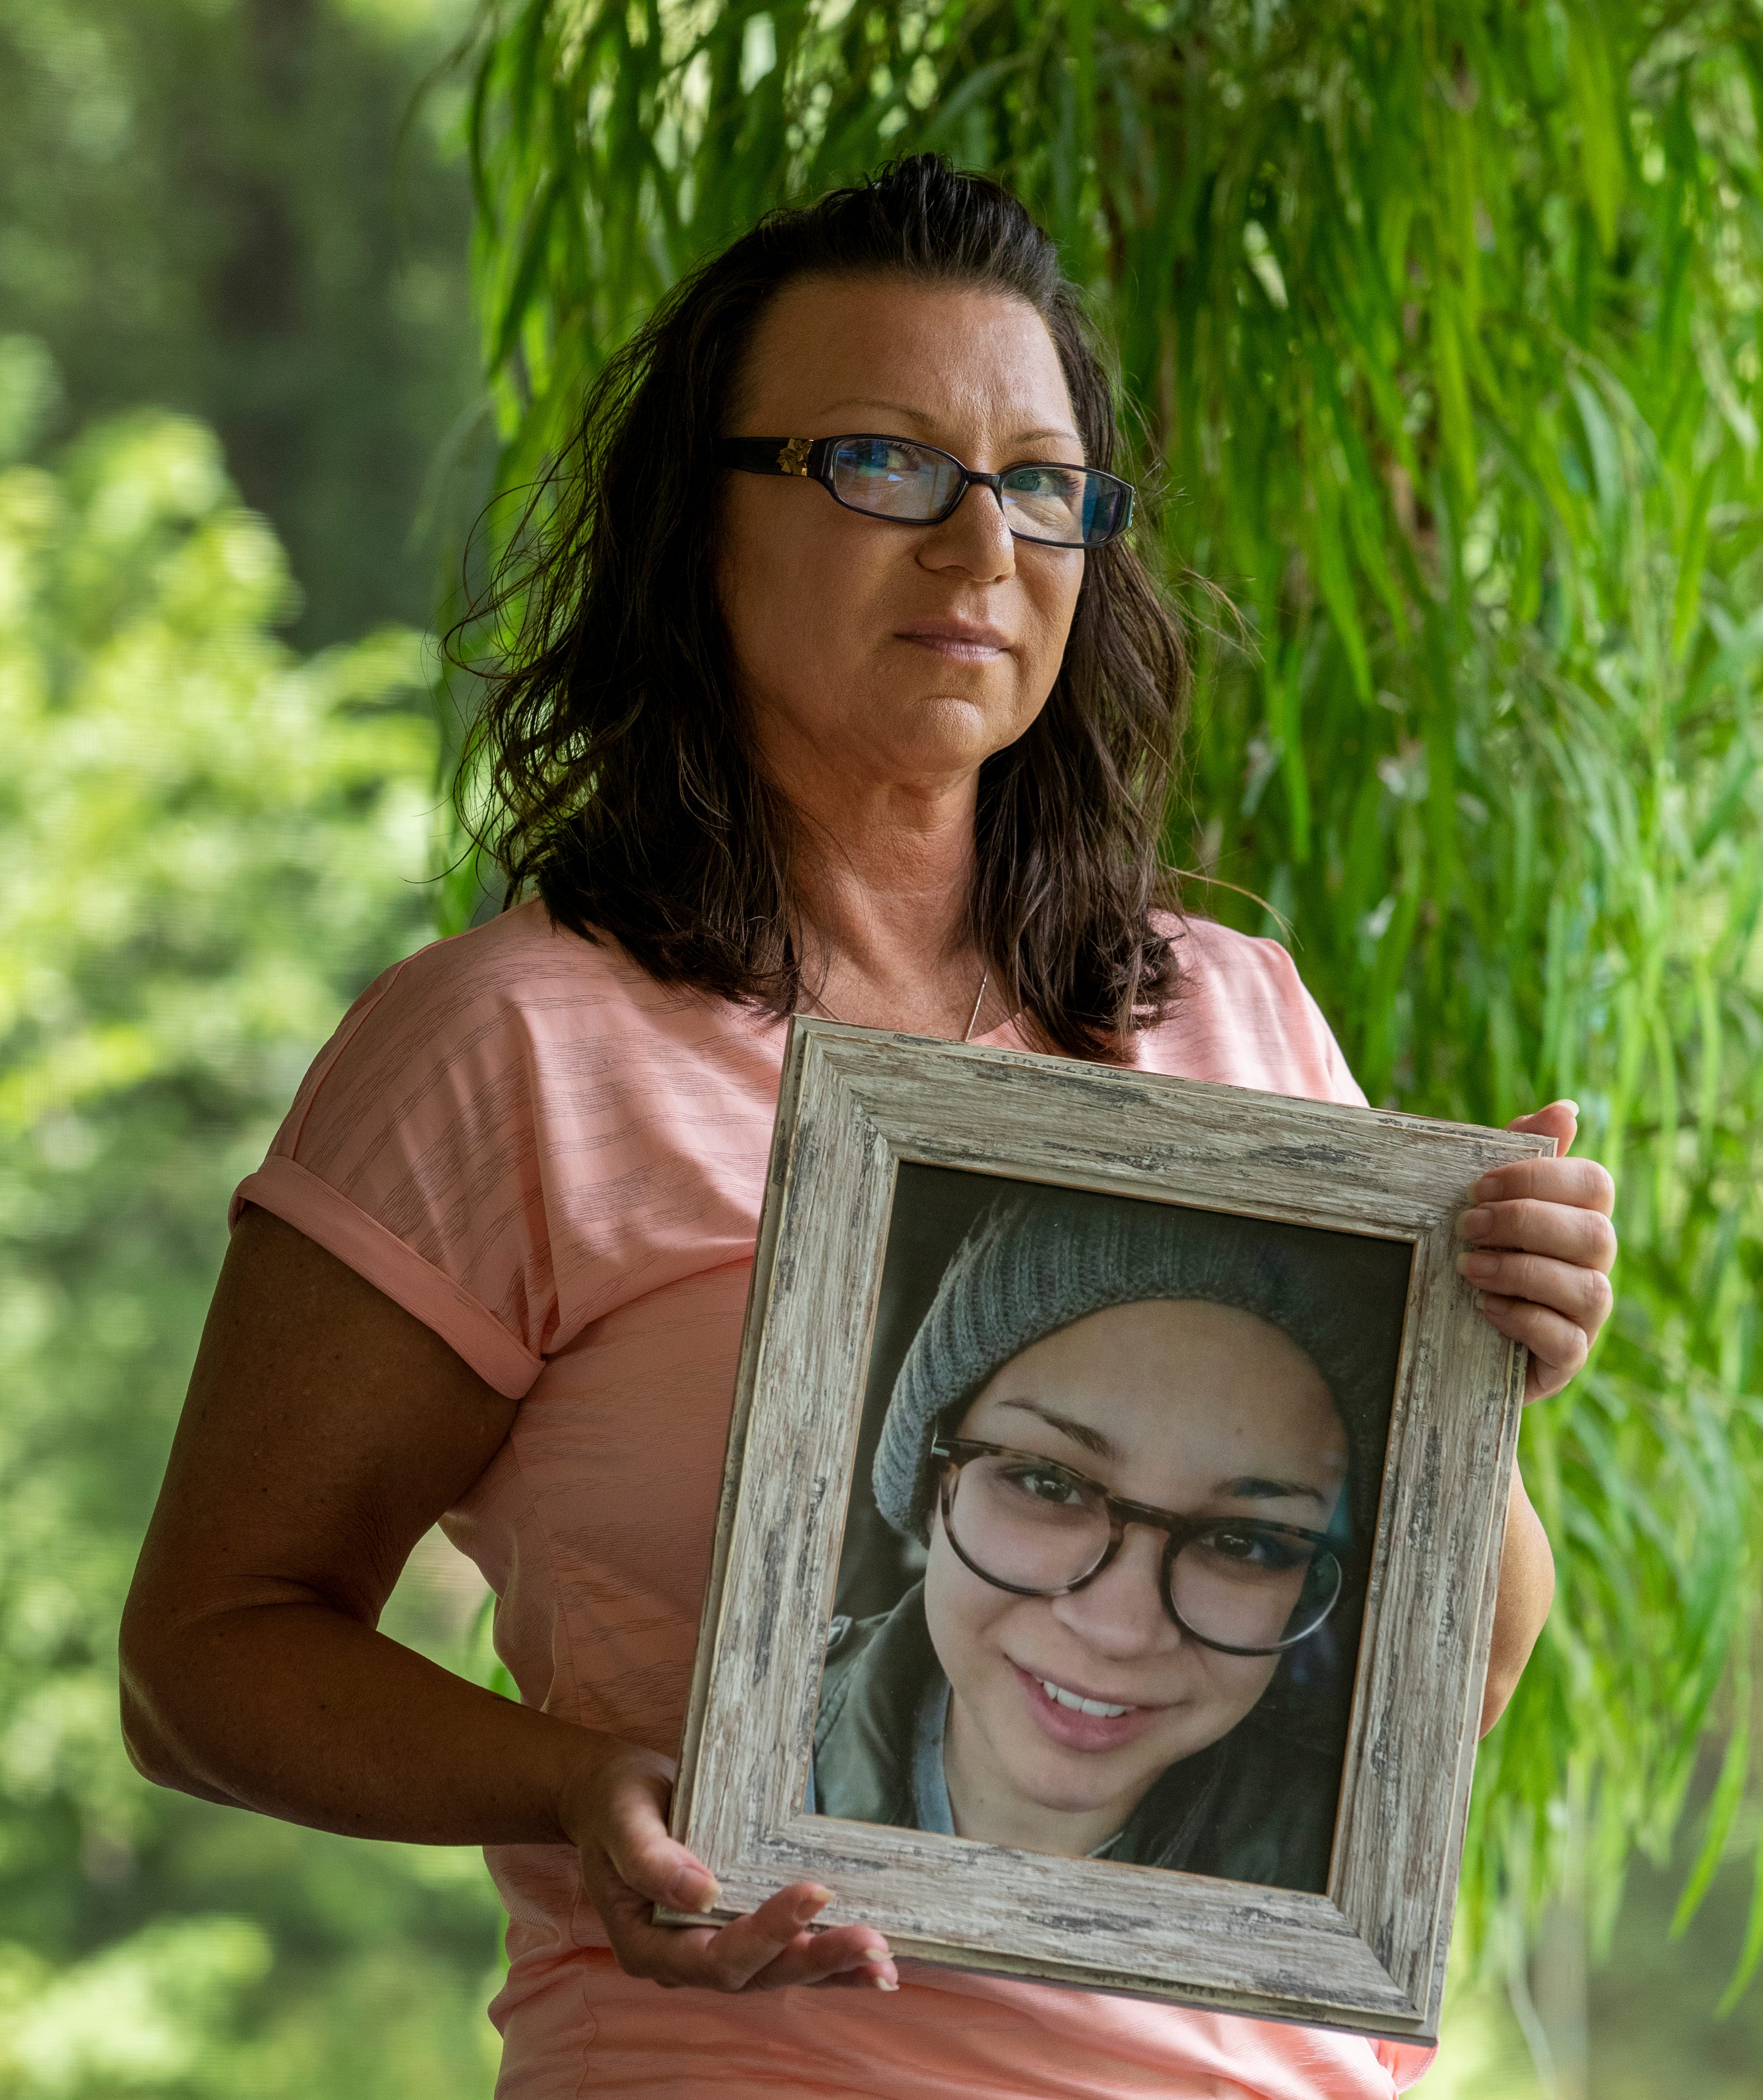 Tamara Meyers holds a photo of her daughter Tia Meyers at home on Tuesday, July 13, 2021, nearly a year since the death of Tia in the nearby Whitley County Jail. She had struggled with drug addiction, and her death, three days after intake, was ruled due to methamphetamine toxicity.